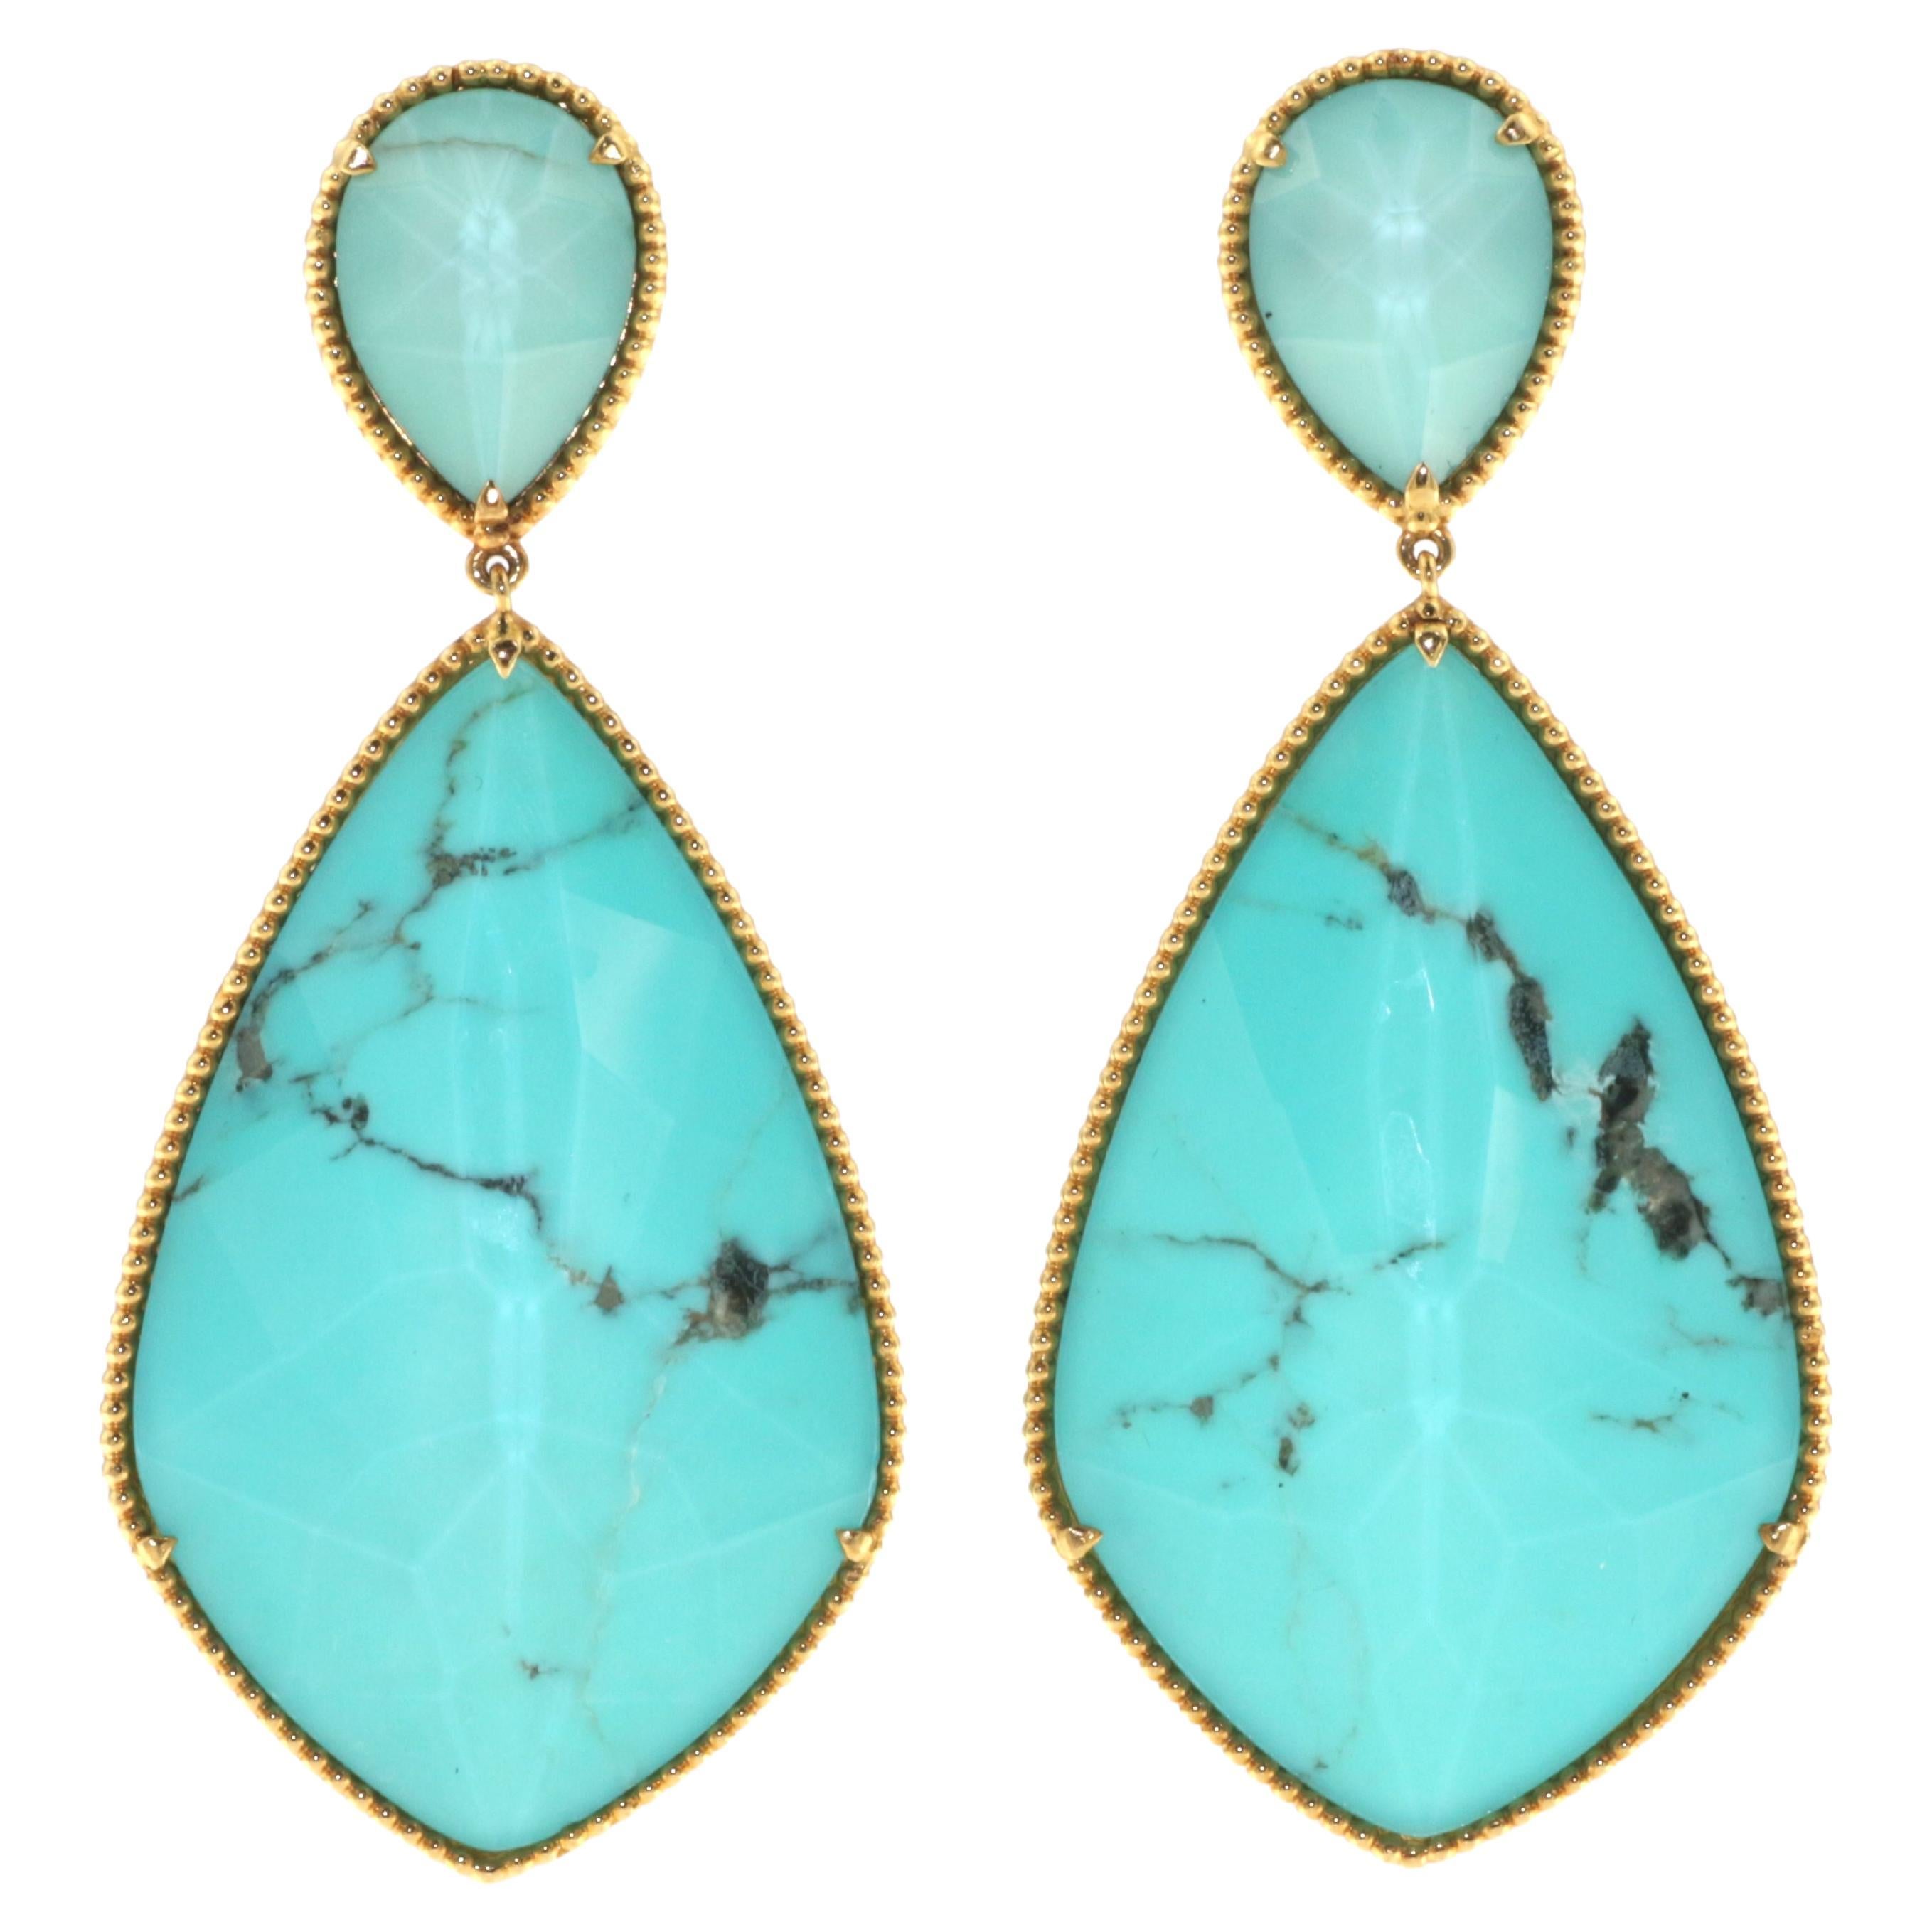 Vintage 53.31 Carat Turquoise Quartz Doublet Dangle Earrings in 18K Yellow Gold For Sale